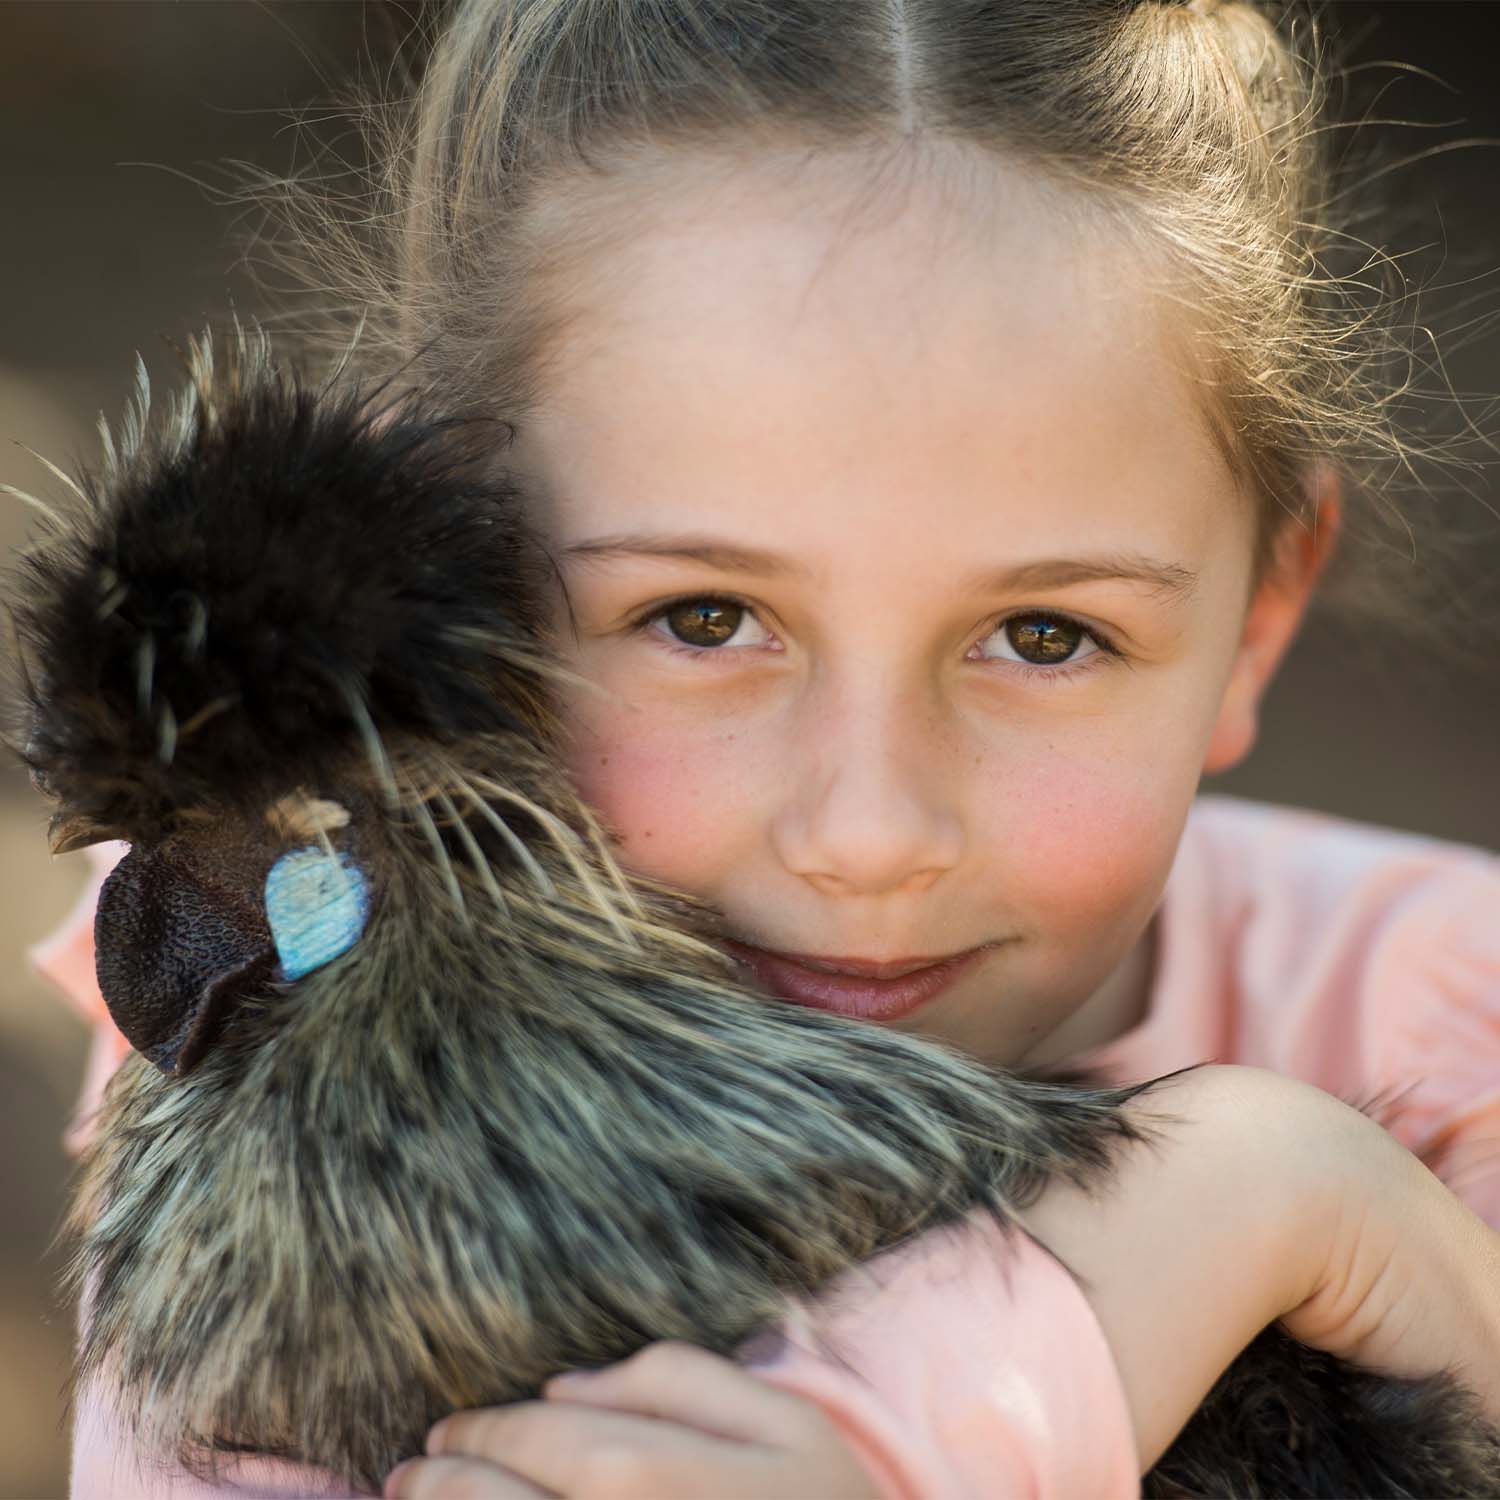 A young girl holding a chicken close to her